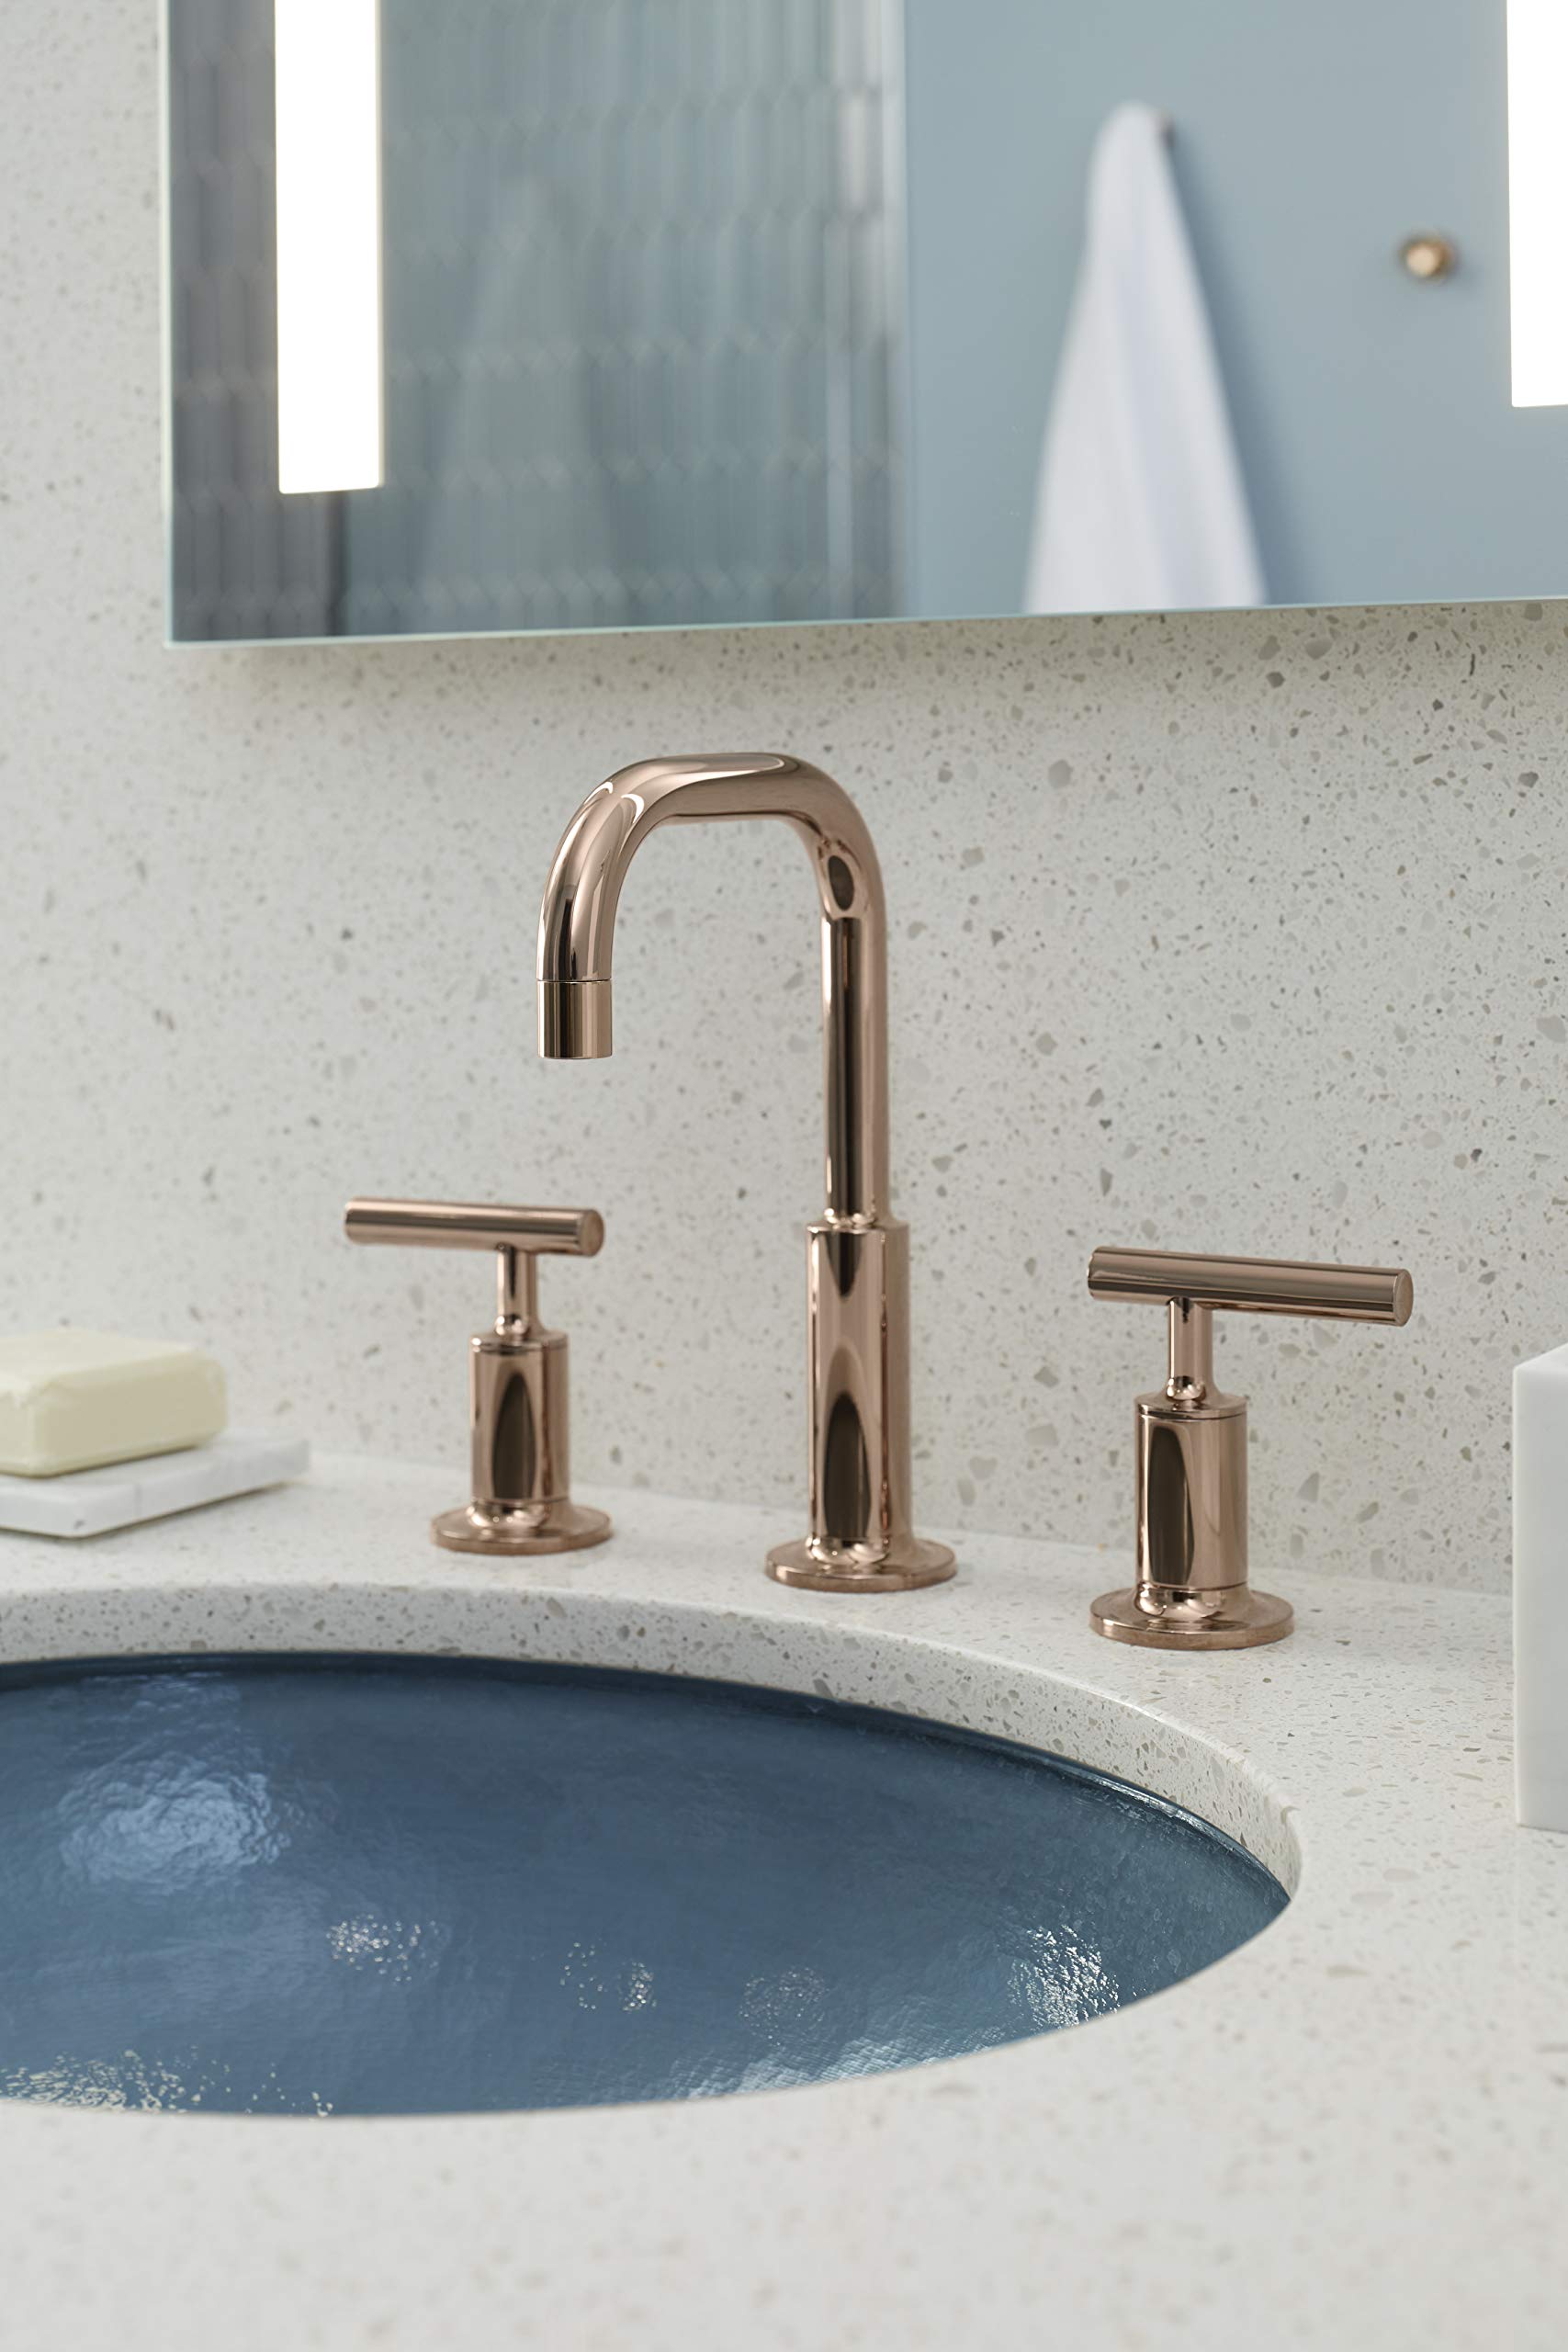 Bathroom Faucet by KOHLER, Bathroom Sink Faucet, Purist Collection, 2-Handle Widespread Faucet with Metal Drain, Vibrant Moderne Brushed Gold, K-14406-4-BGD